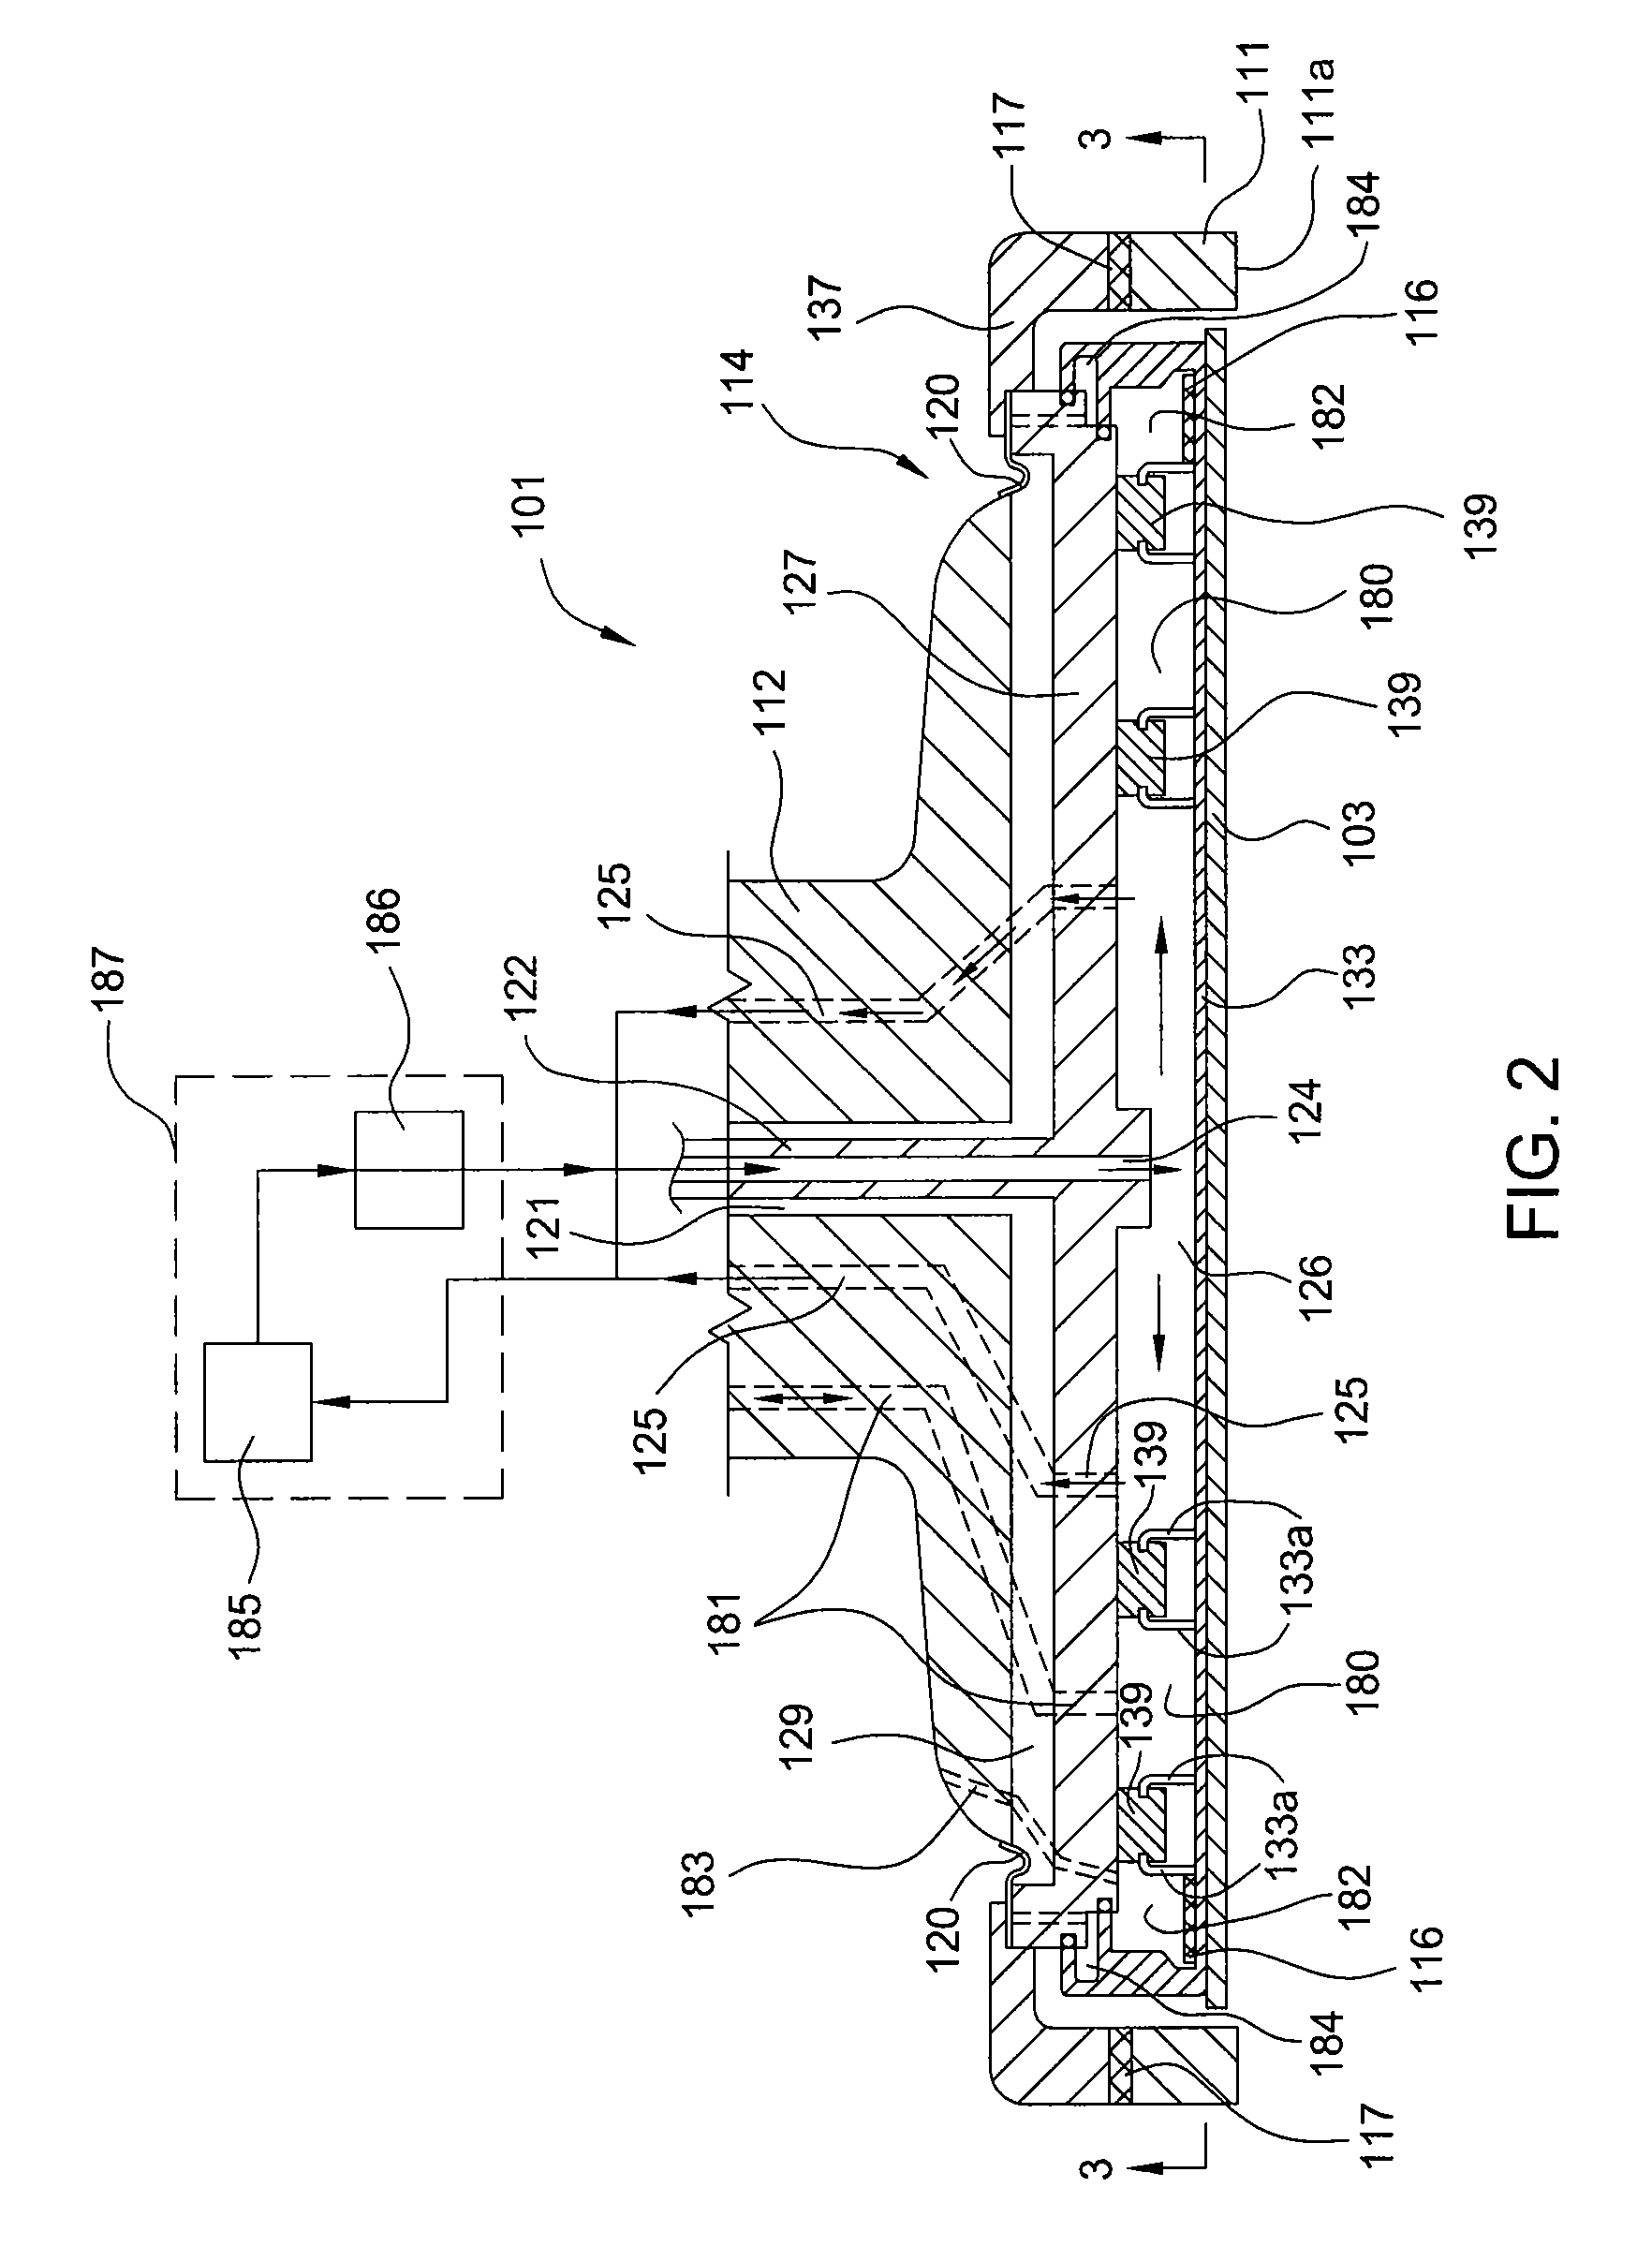 Apparatus and method for temperature control during polishing